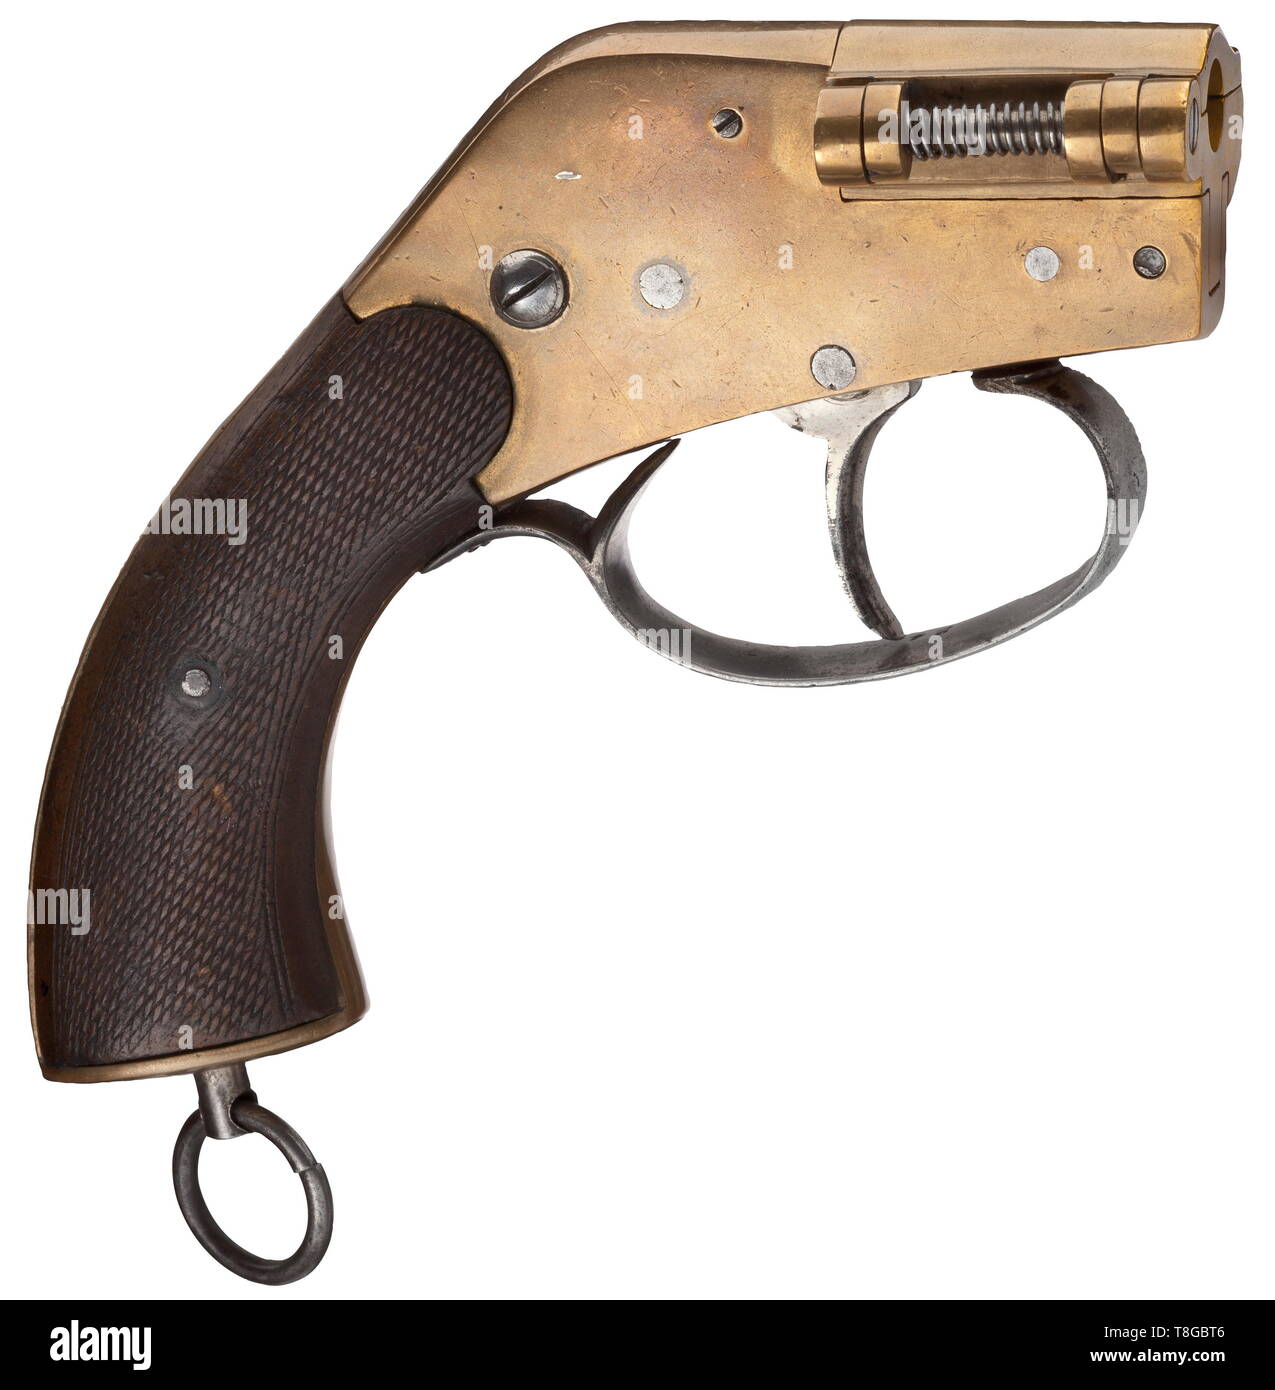 A barrelless aviator's flare pistol, Eisfeld system, brass Cal. 11mm special cartridge with pre-charge, no. E 1124. Matching numbers. Folding lock. Double action. Designing engineer J.F. Eisfeld, Silberhütte/Sachsen-Anhalt. Manufactured by the Eisfeld Company Apart from serial number no other stamps or inscriptions. Brass manufacture. Trigger guard, operational and small parts made of steel. Matching-numbered walnut grip panels with fine chequering. Lanyard loop. Widely unknown and extremely rare brass model for the imperial air force and the army in very good overall condi, Editorial-Use-Only Stock Photo